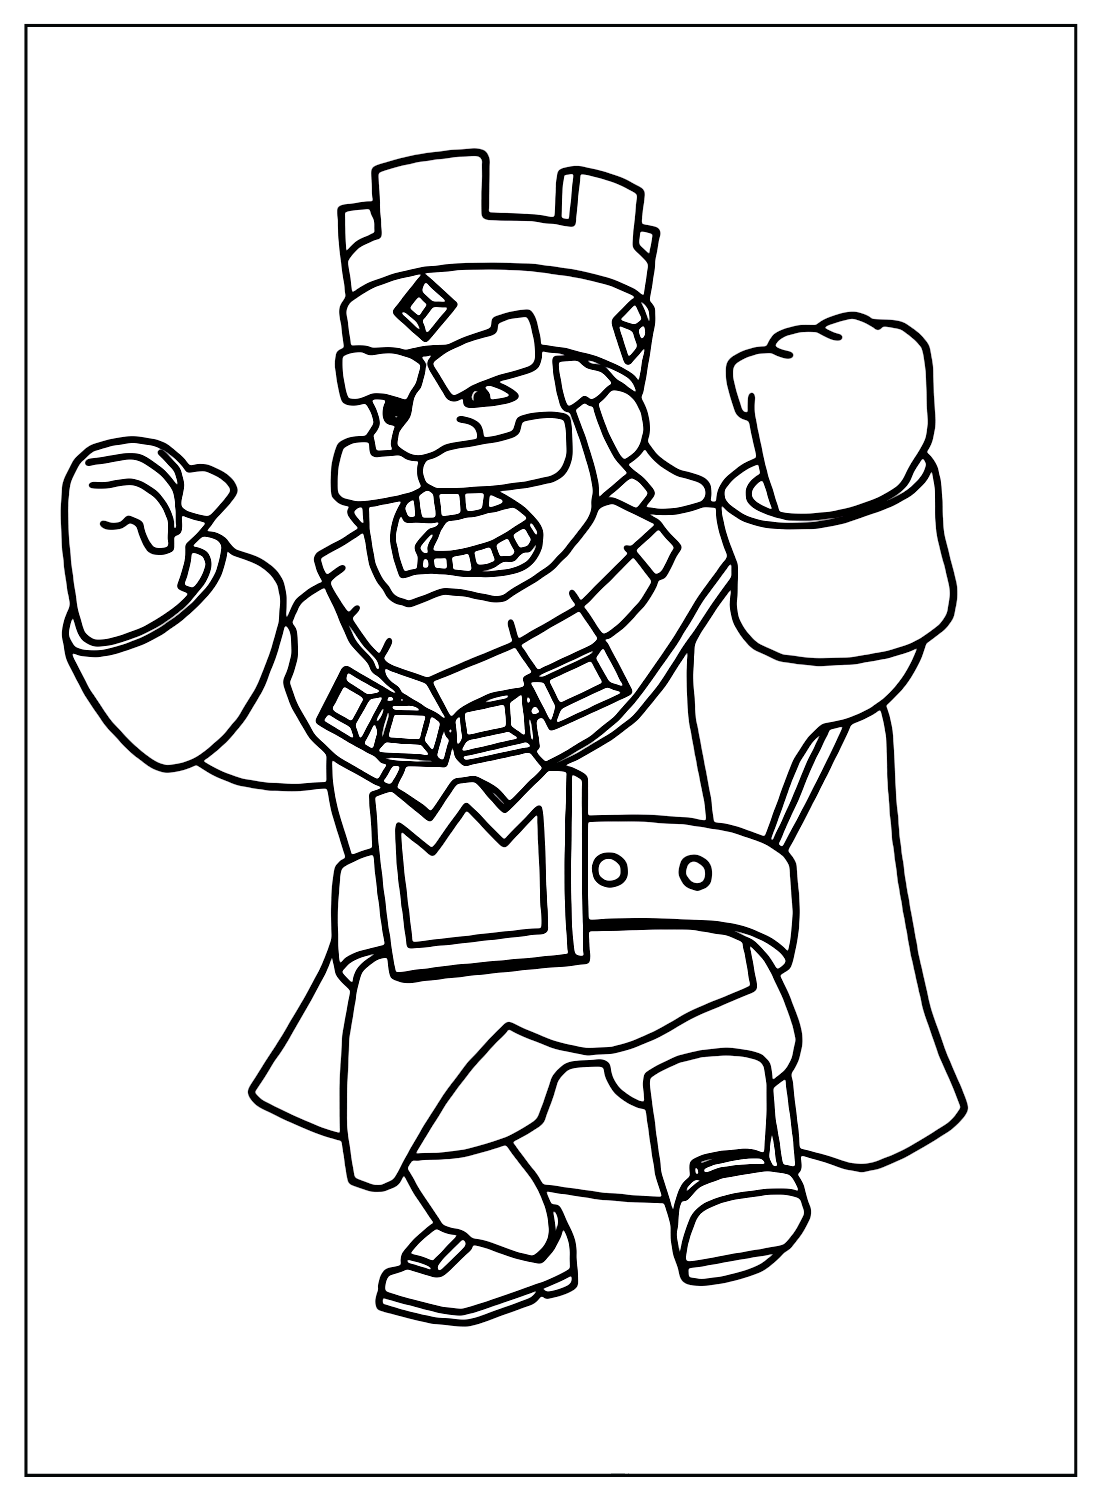 Clash of Clans Barbarian King Coloring Pages from Clash of Clans